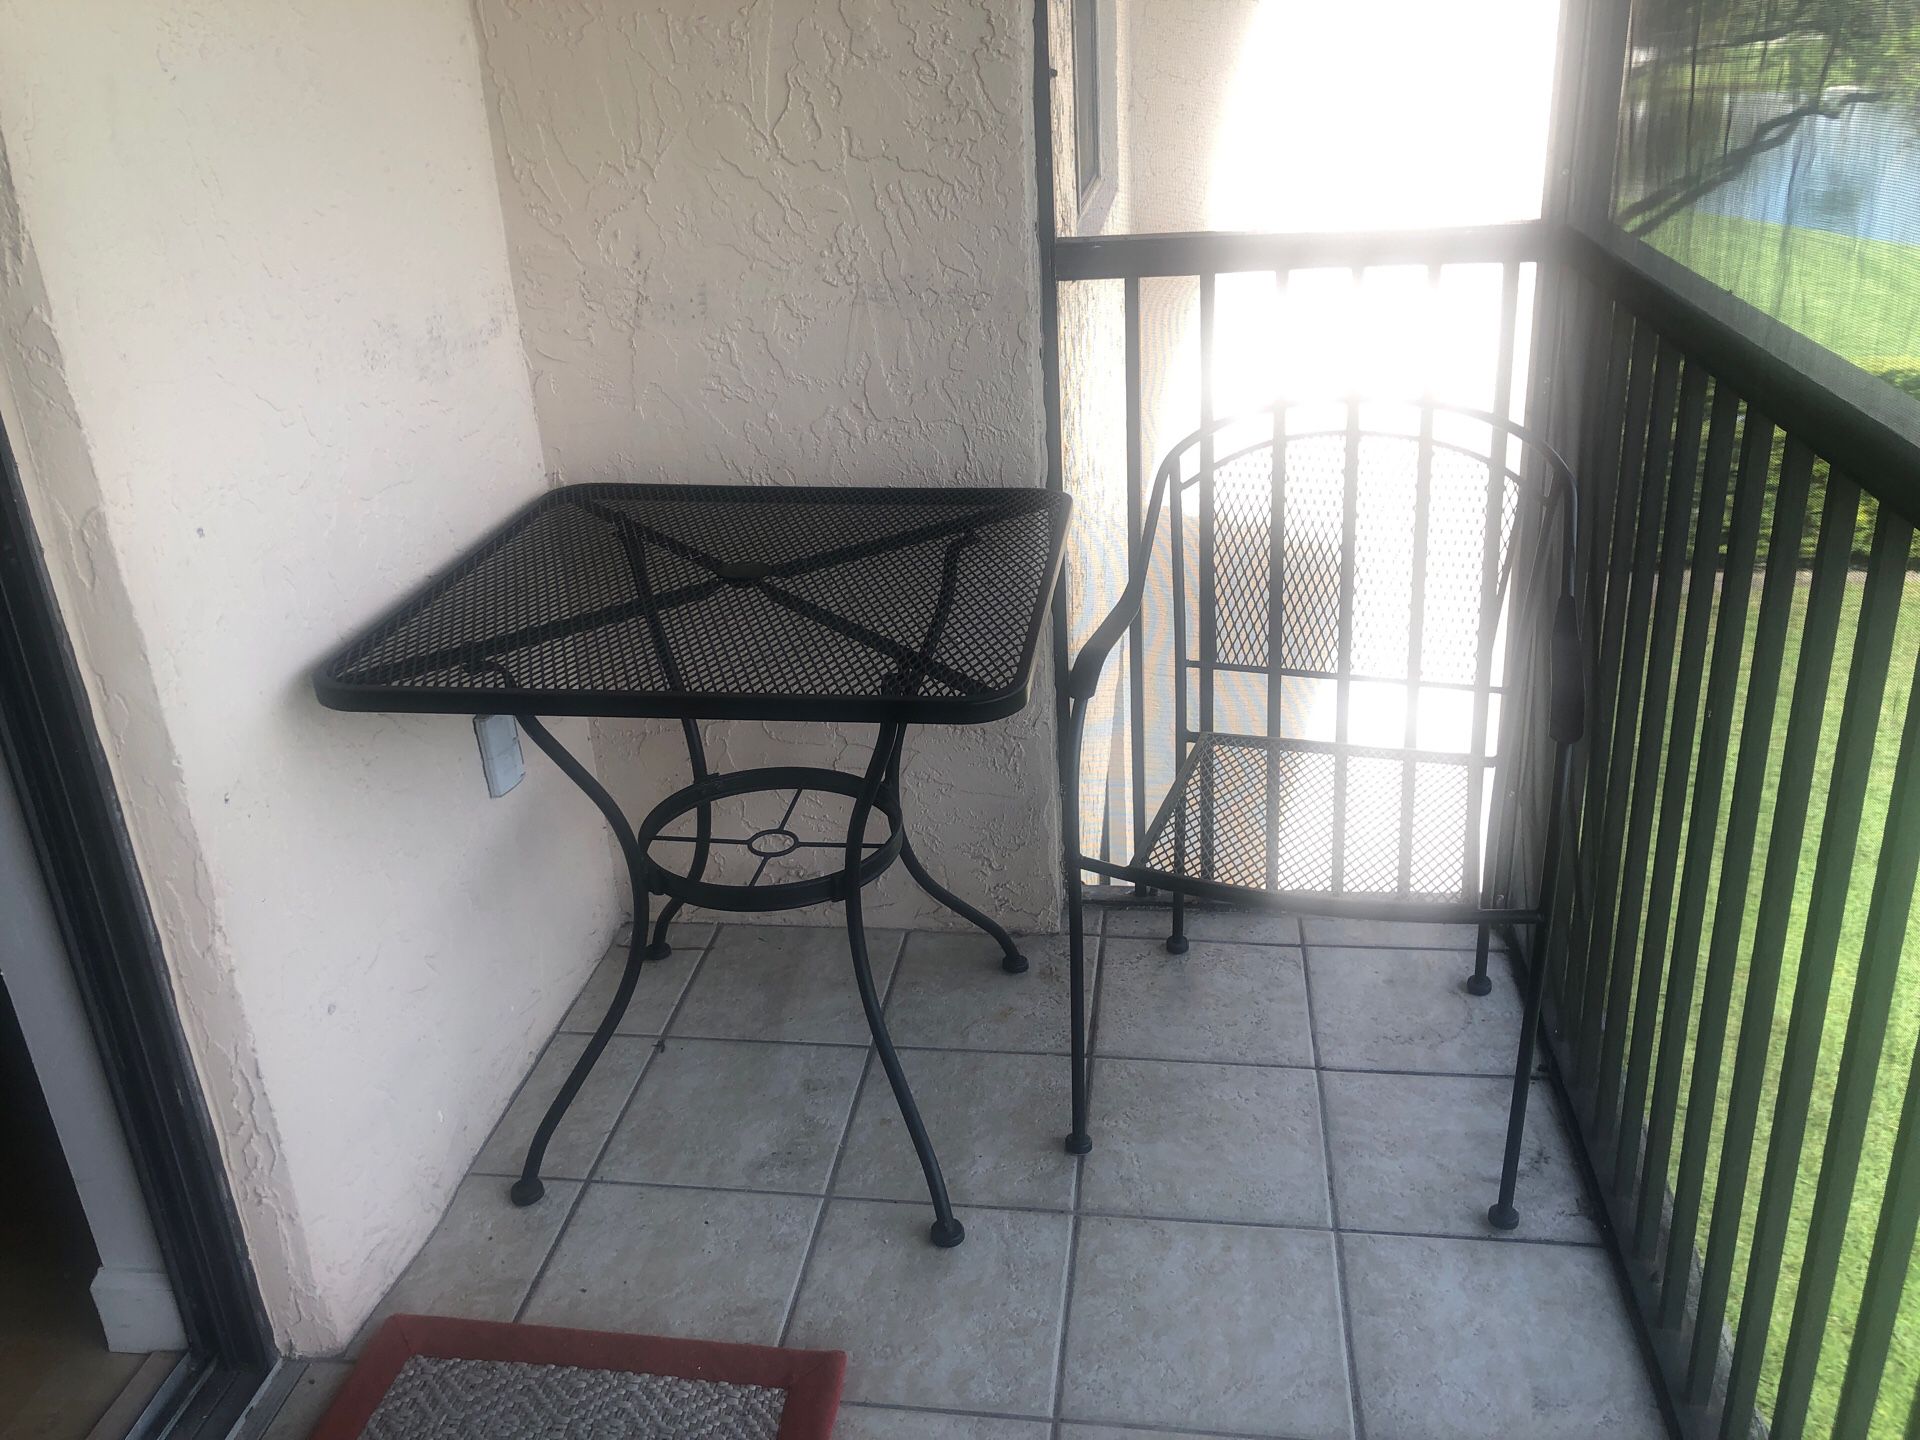 Patio Table & Two Chairs